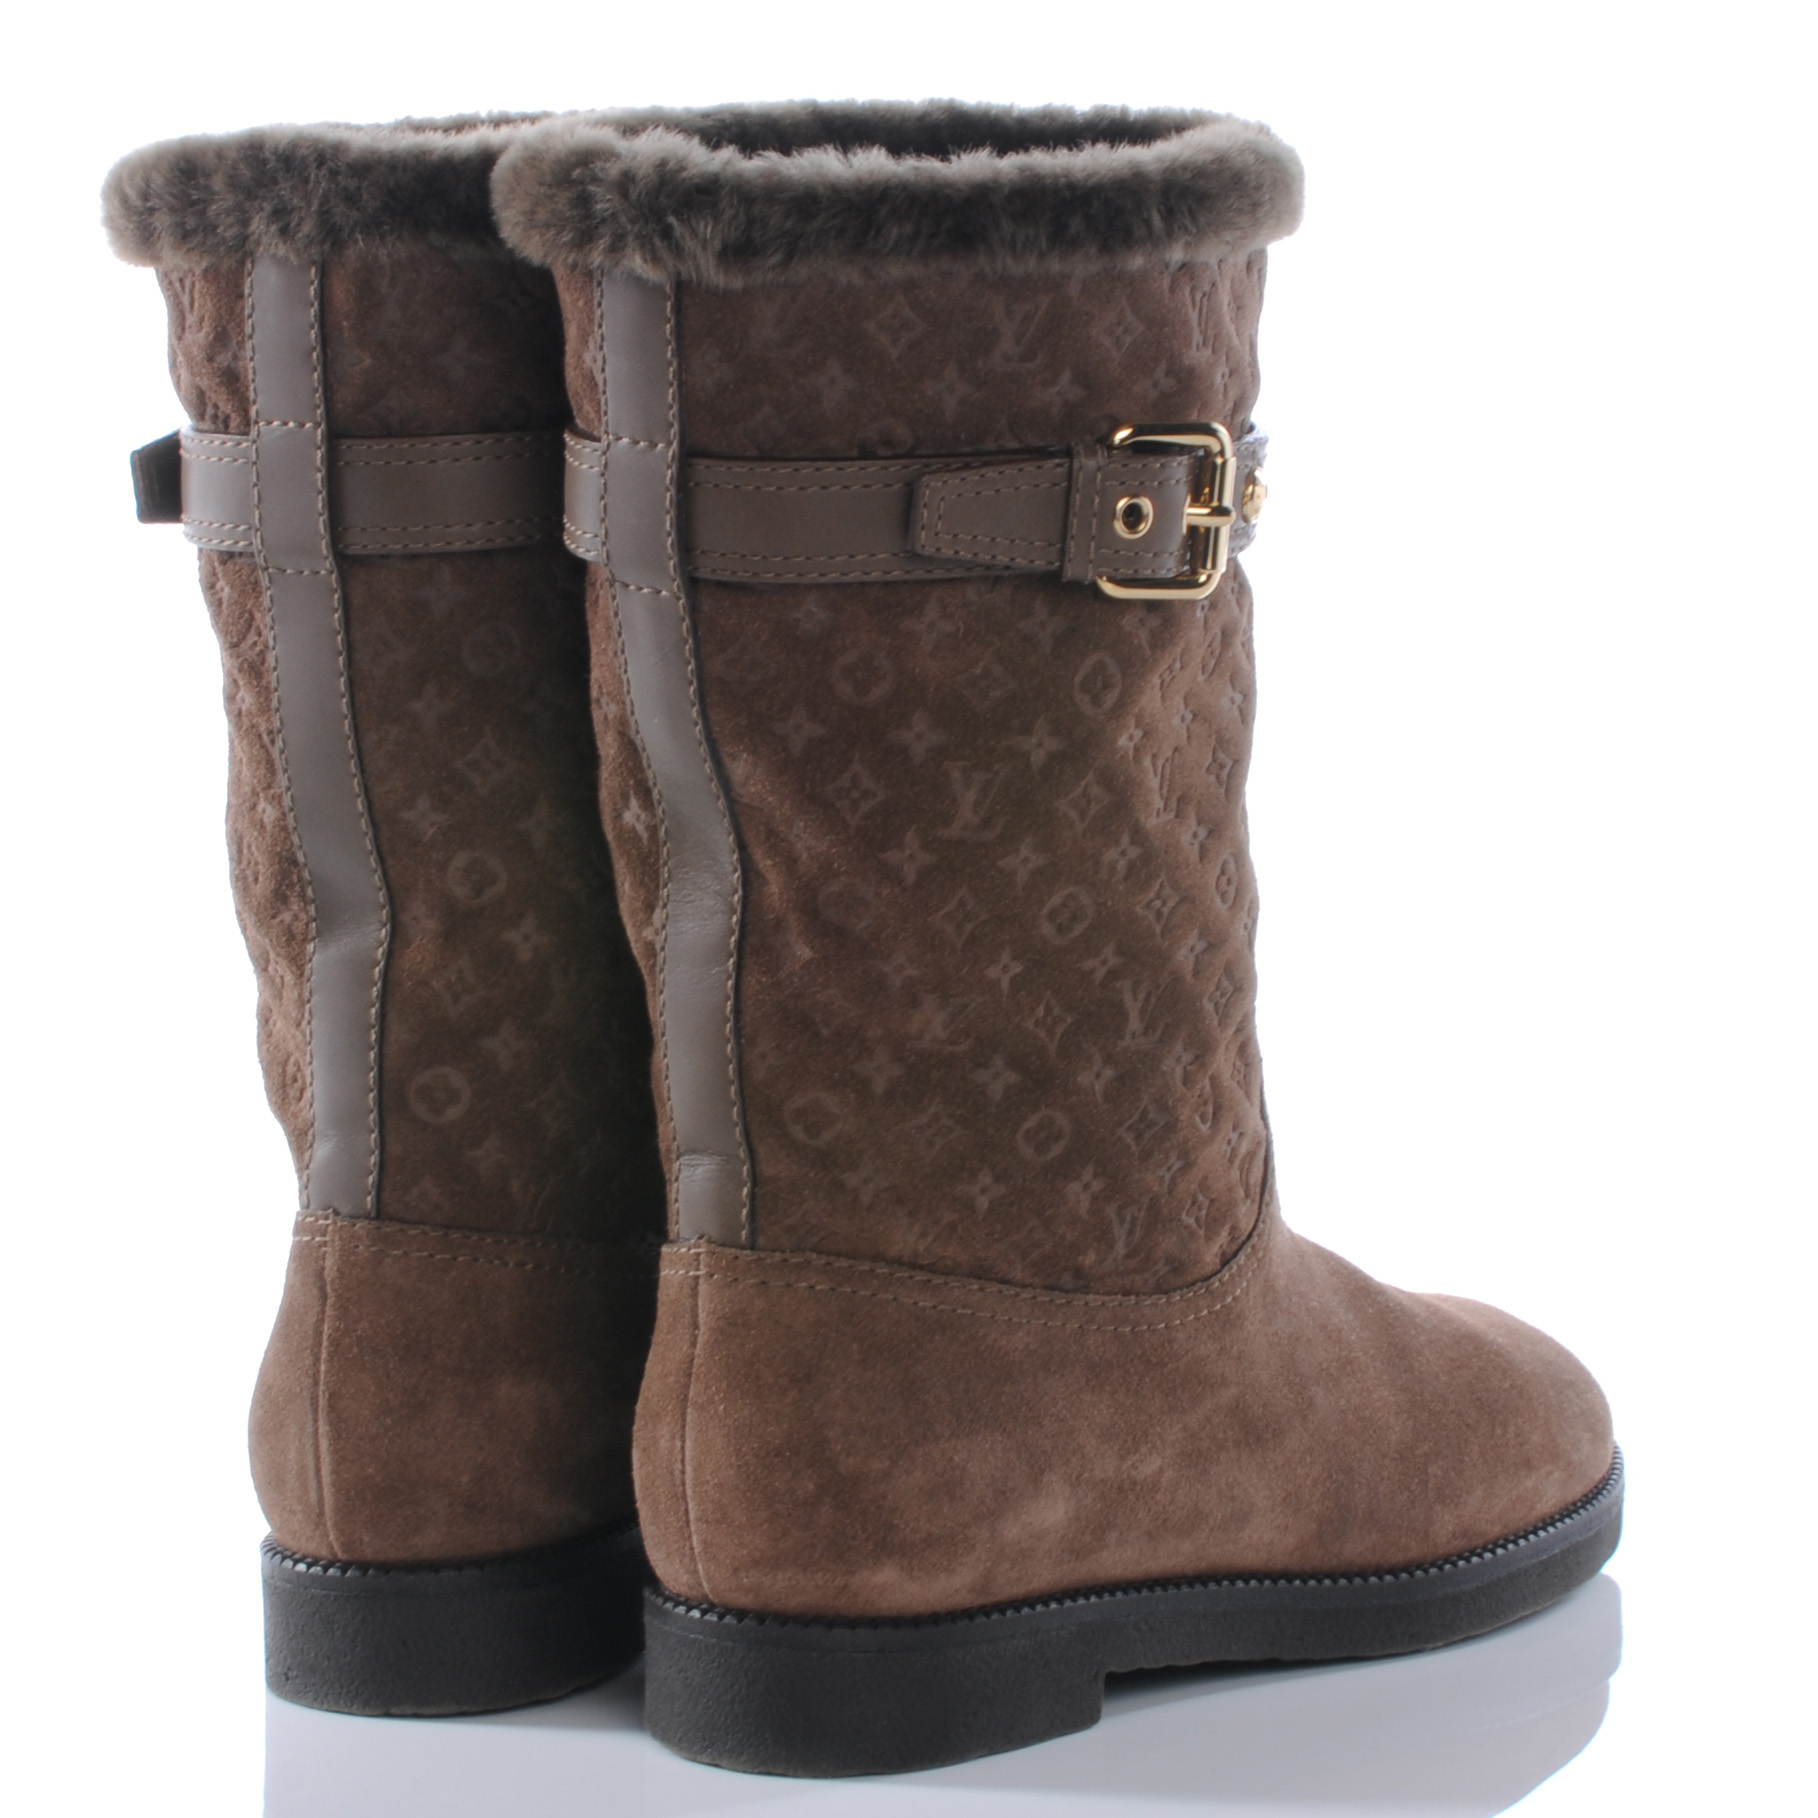 LOUIS VUITTON Suede Fur Wintry Boots 38 Brown 38522